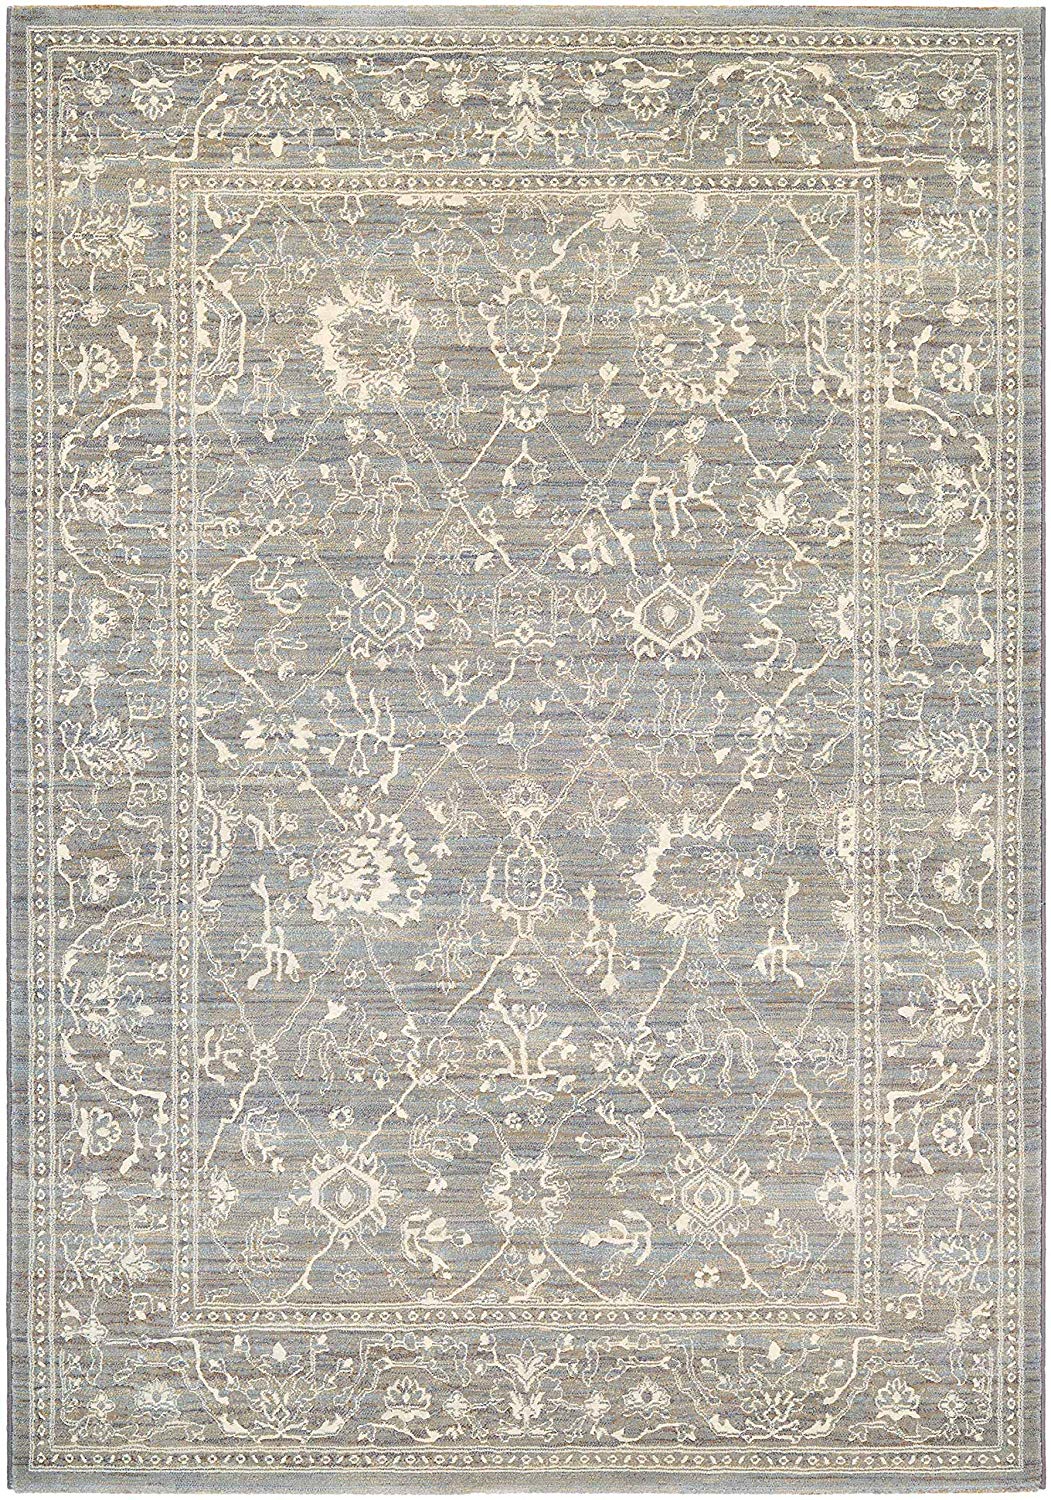 Couristan Everest Collection Persian Arabesque Rug, Charcoal/Ivory